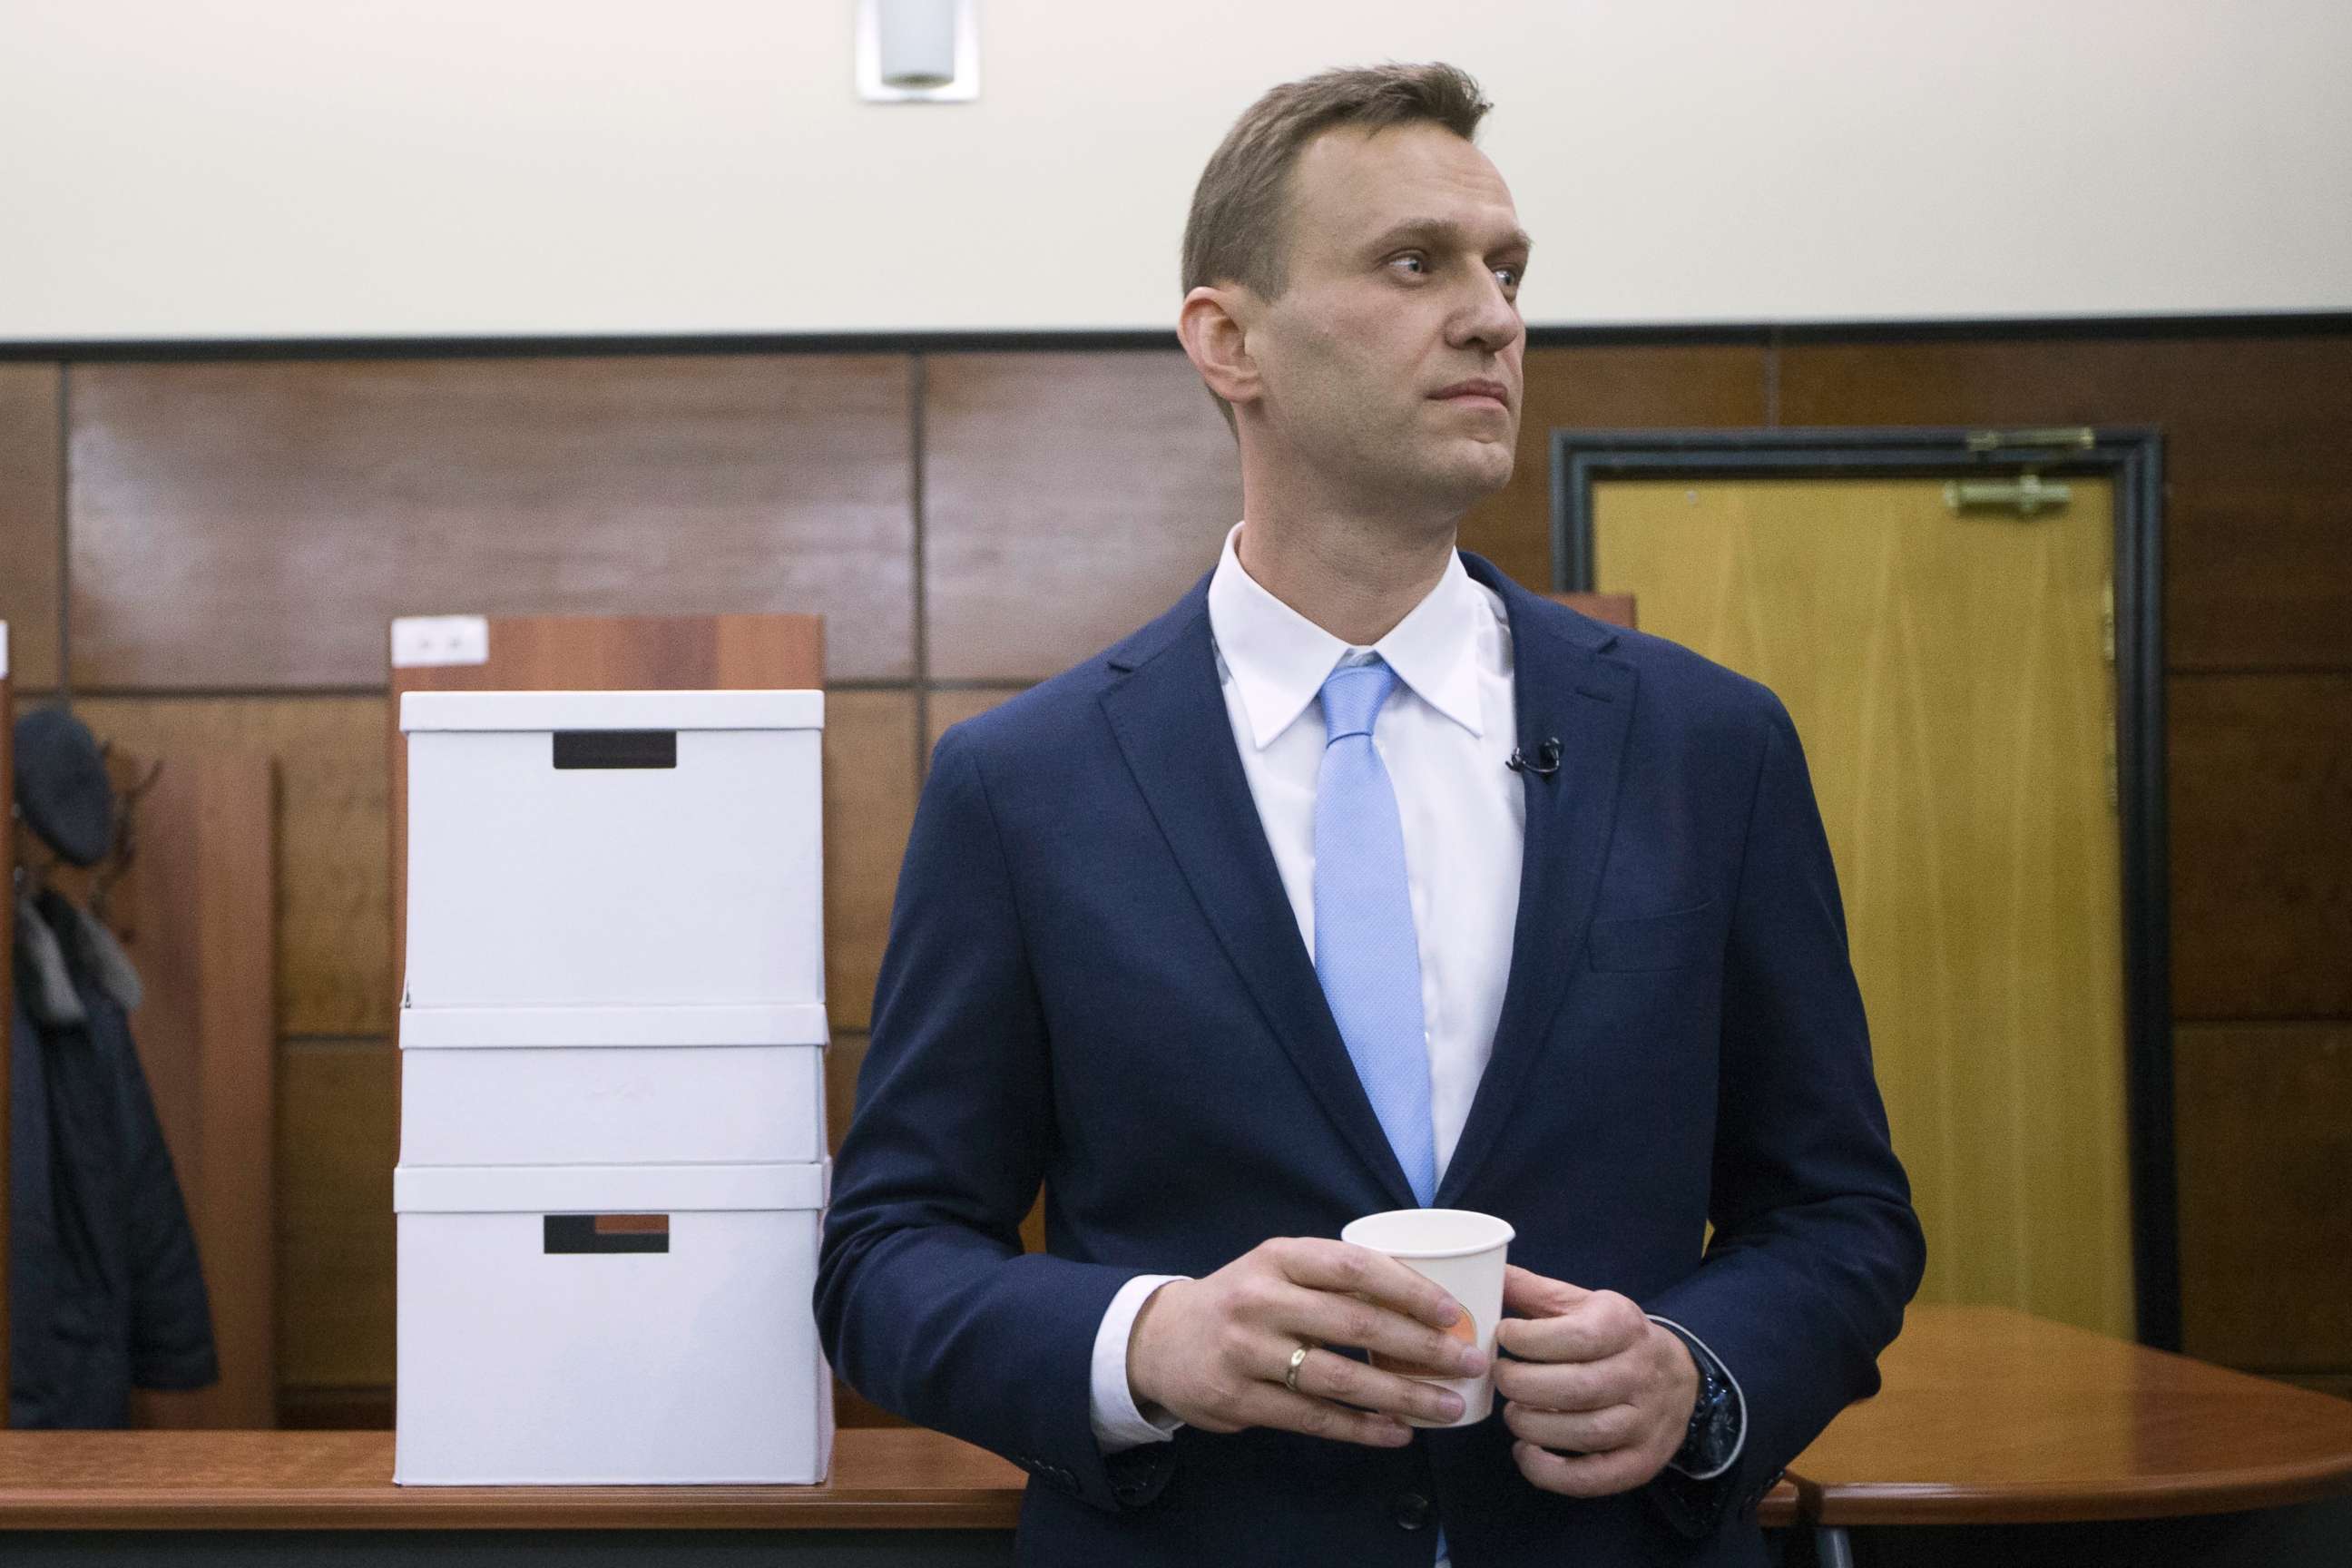 PHOTO: Russian opposition leader Alexei Navalny rests next to boxes with endorsement papers in support of his presidential bid to Russia's Central Election in Moscow, Dec. 24, 2017.